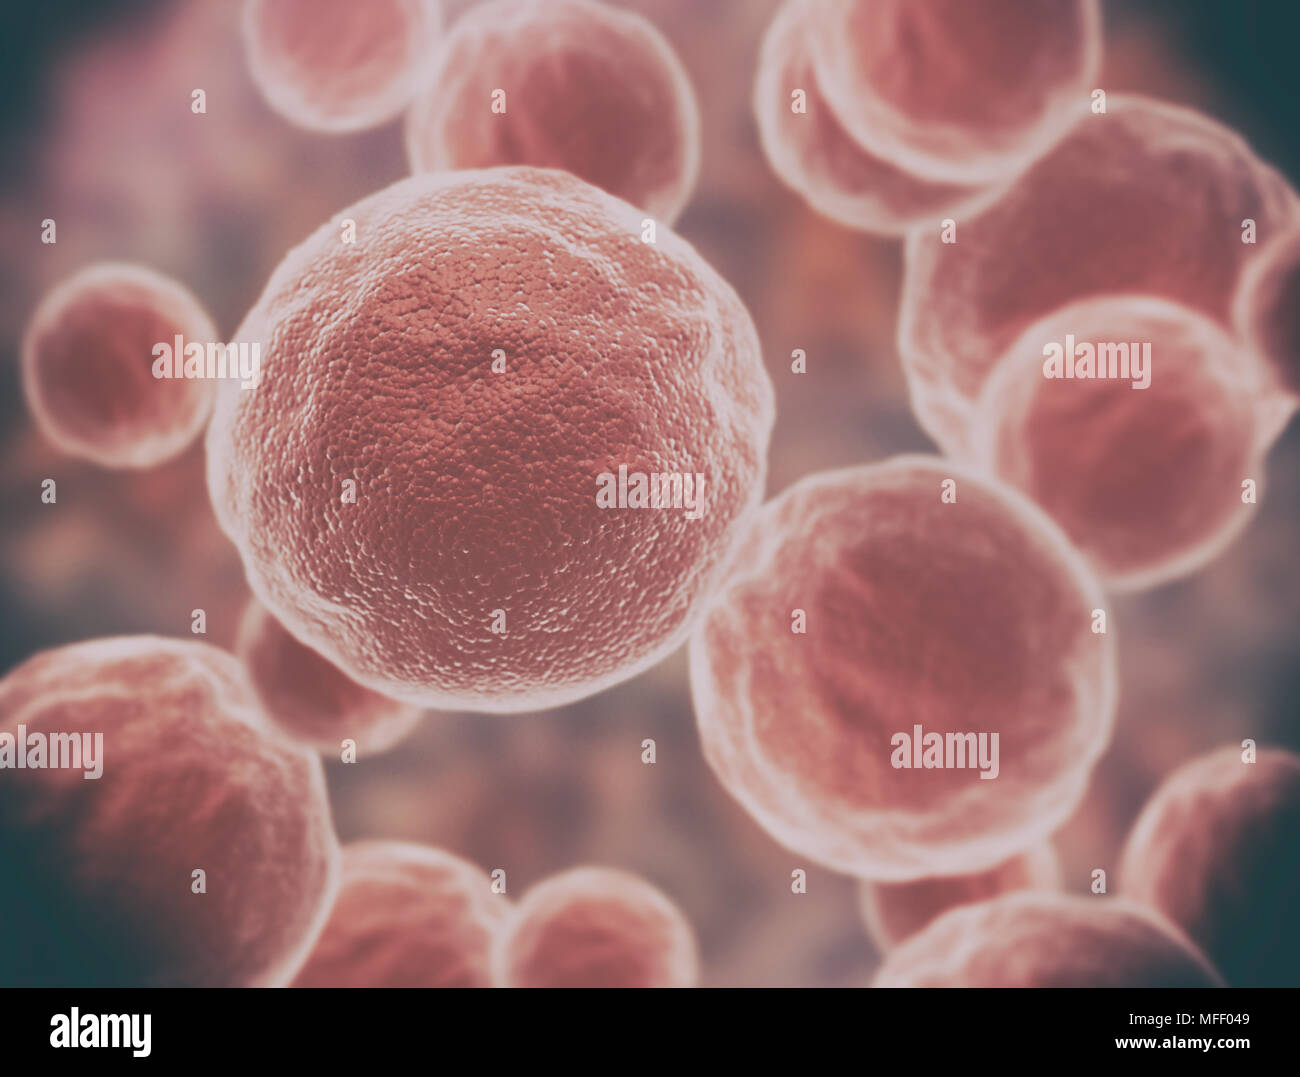 Cancer cells abnormal shaped cells Stock Photo